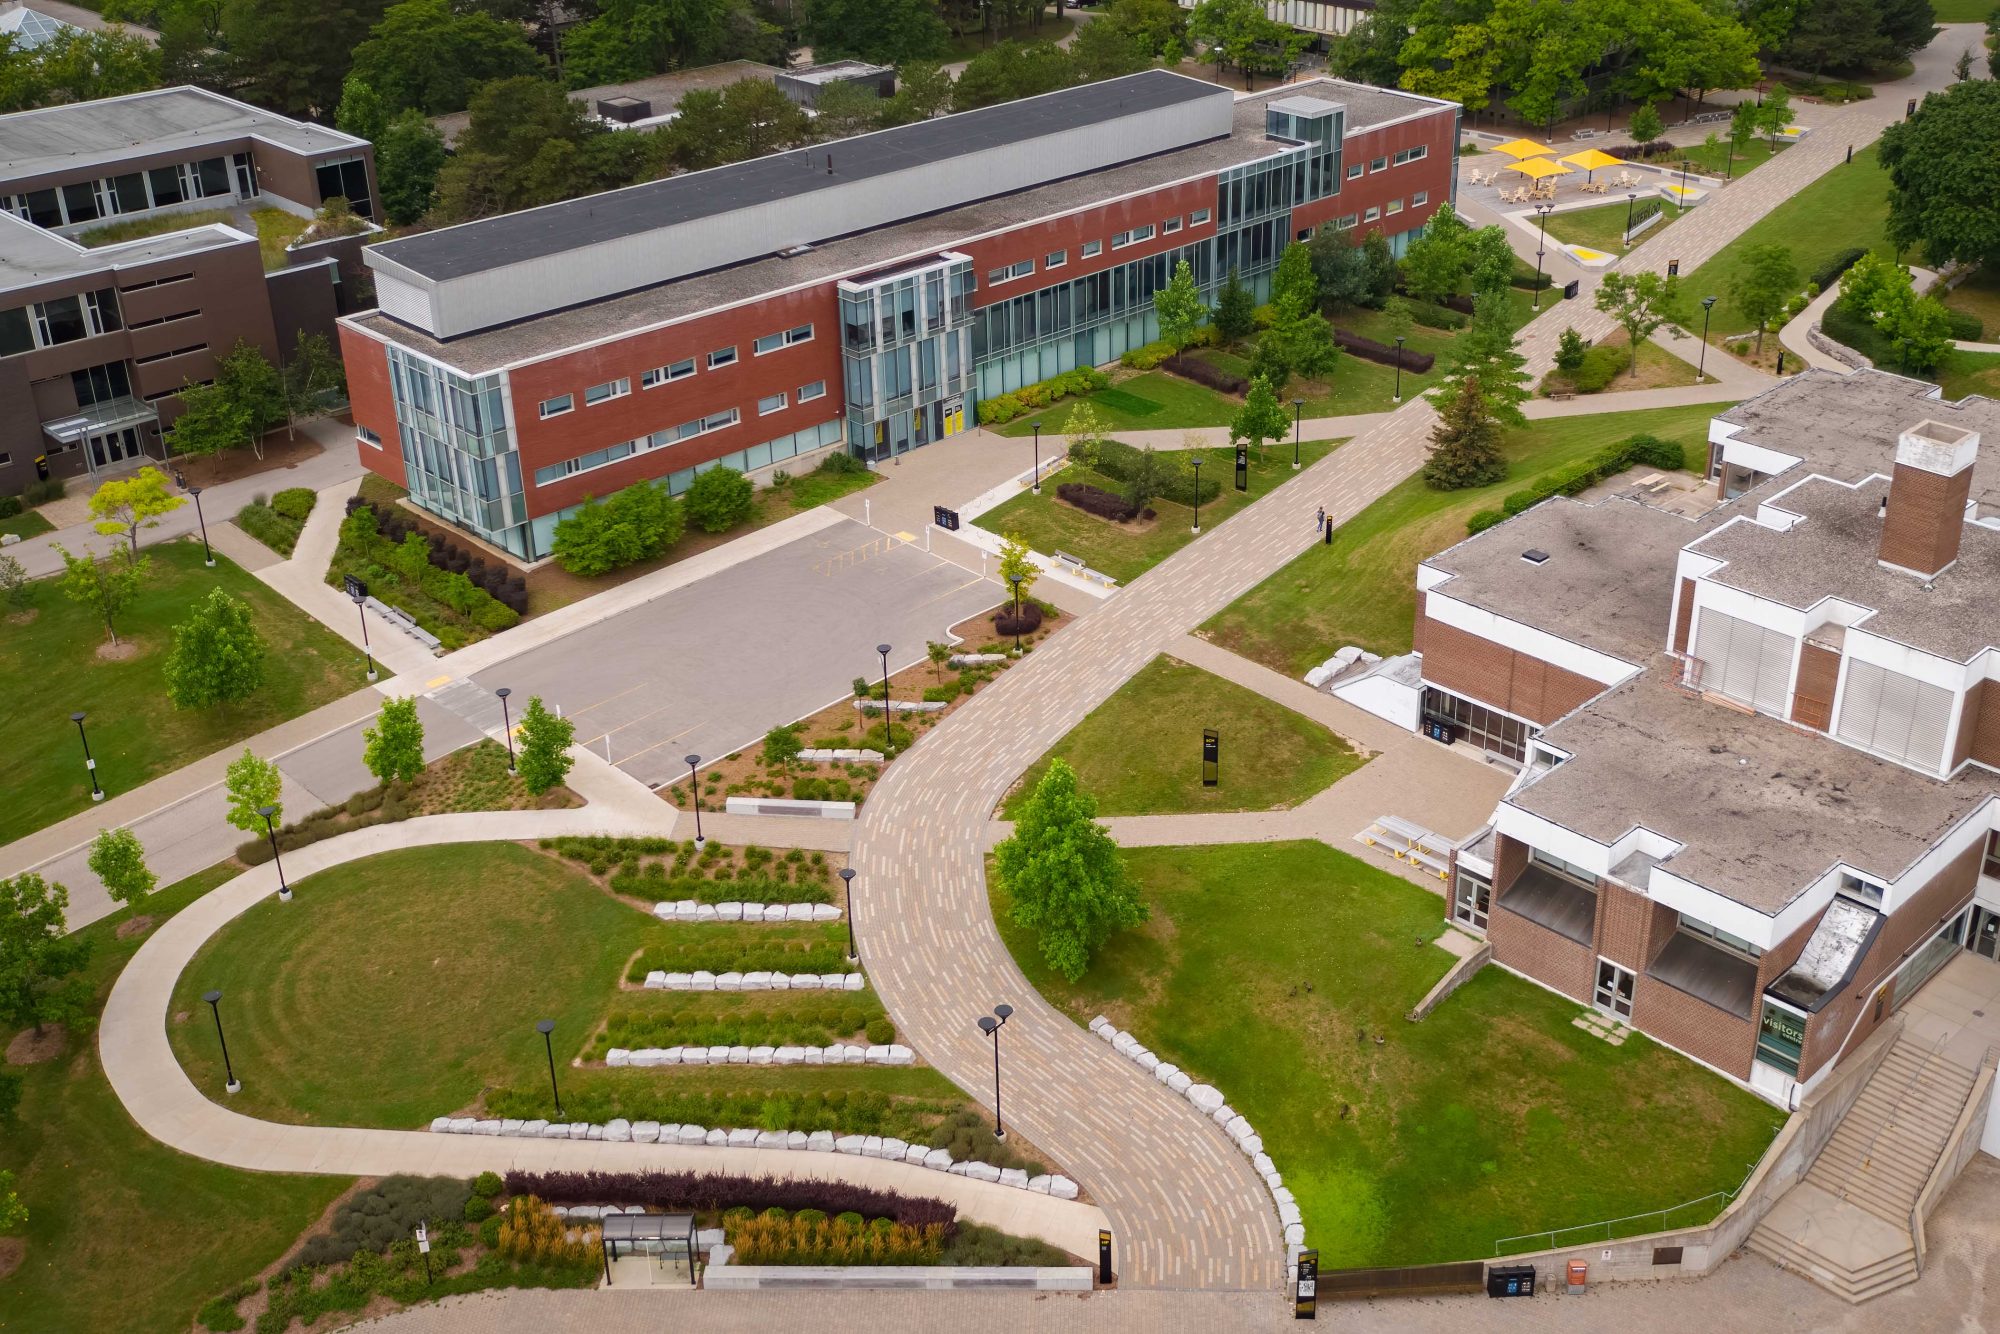 Aerial view of the University of Waterloo campus grounds showing path towards the South Common area via linear interlocked paving.